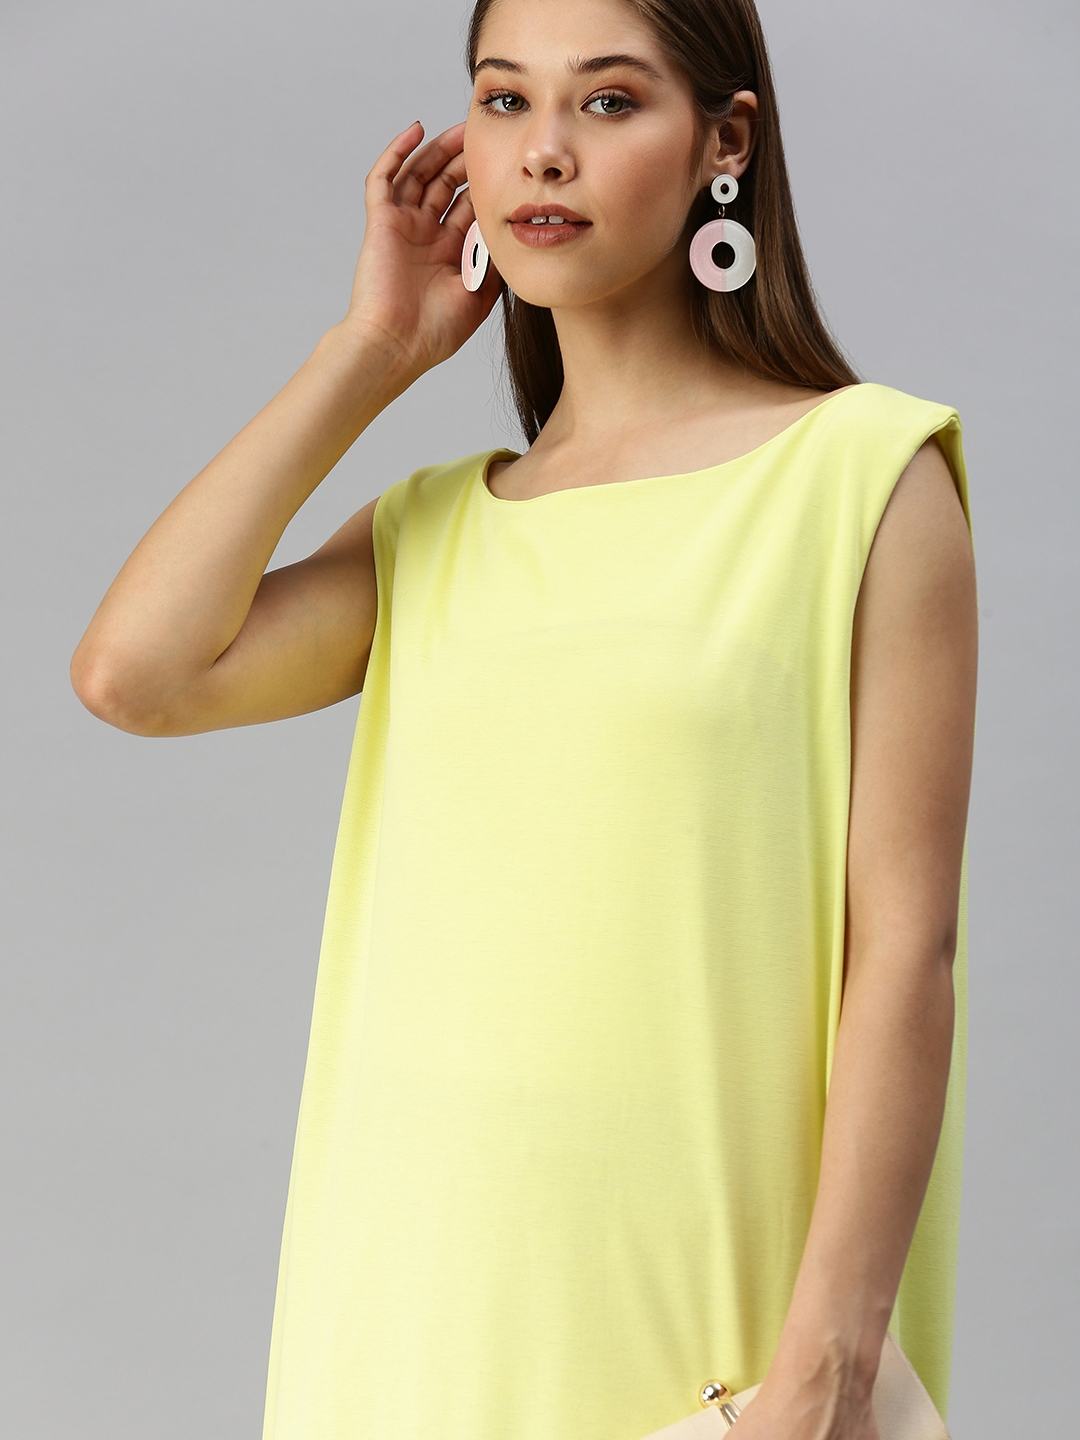 Maternity T-Shirt Dress With a Pocket | A Pea in the Pod - A Pea In the Pod